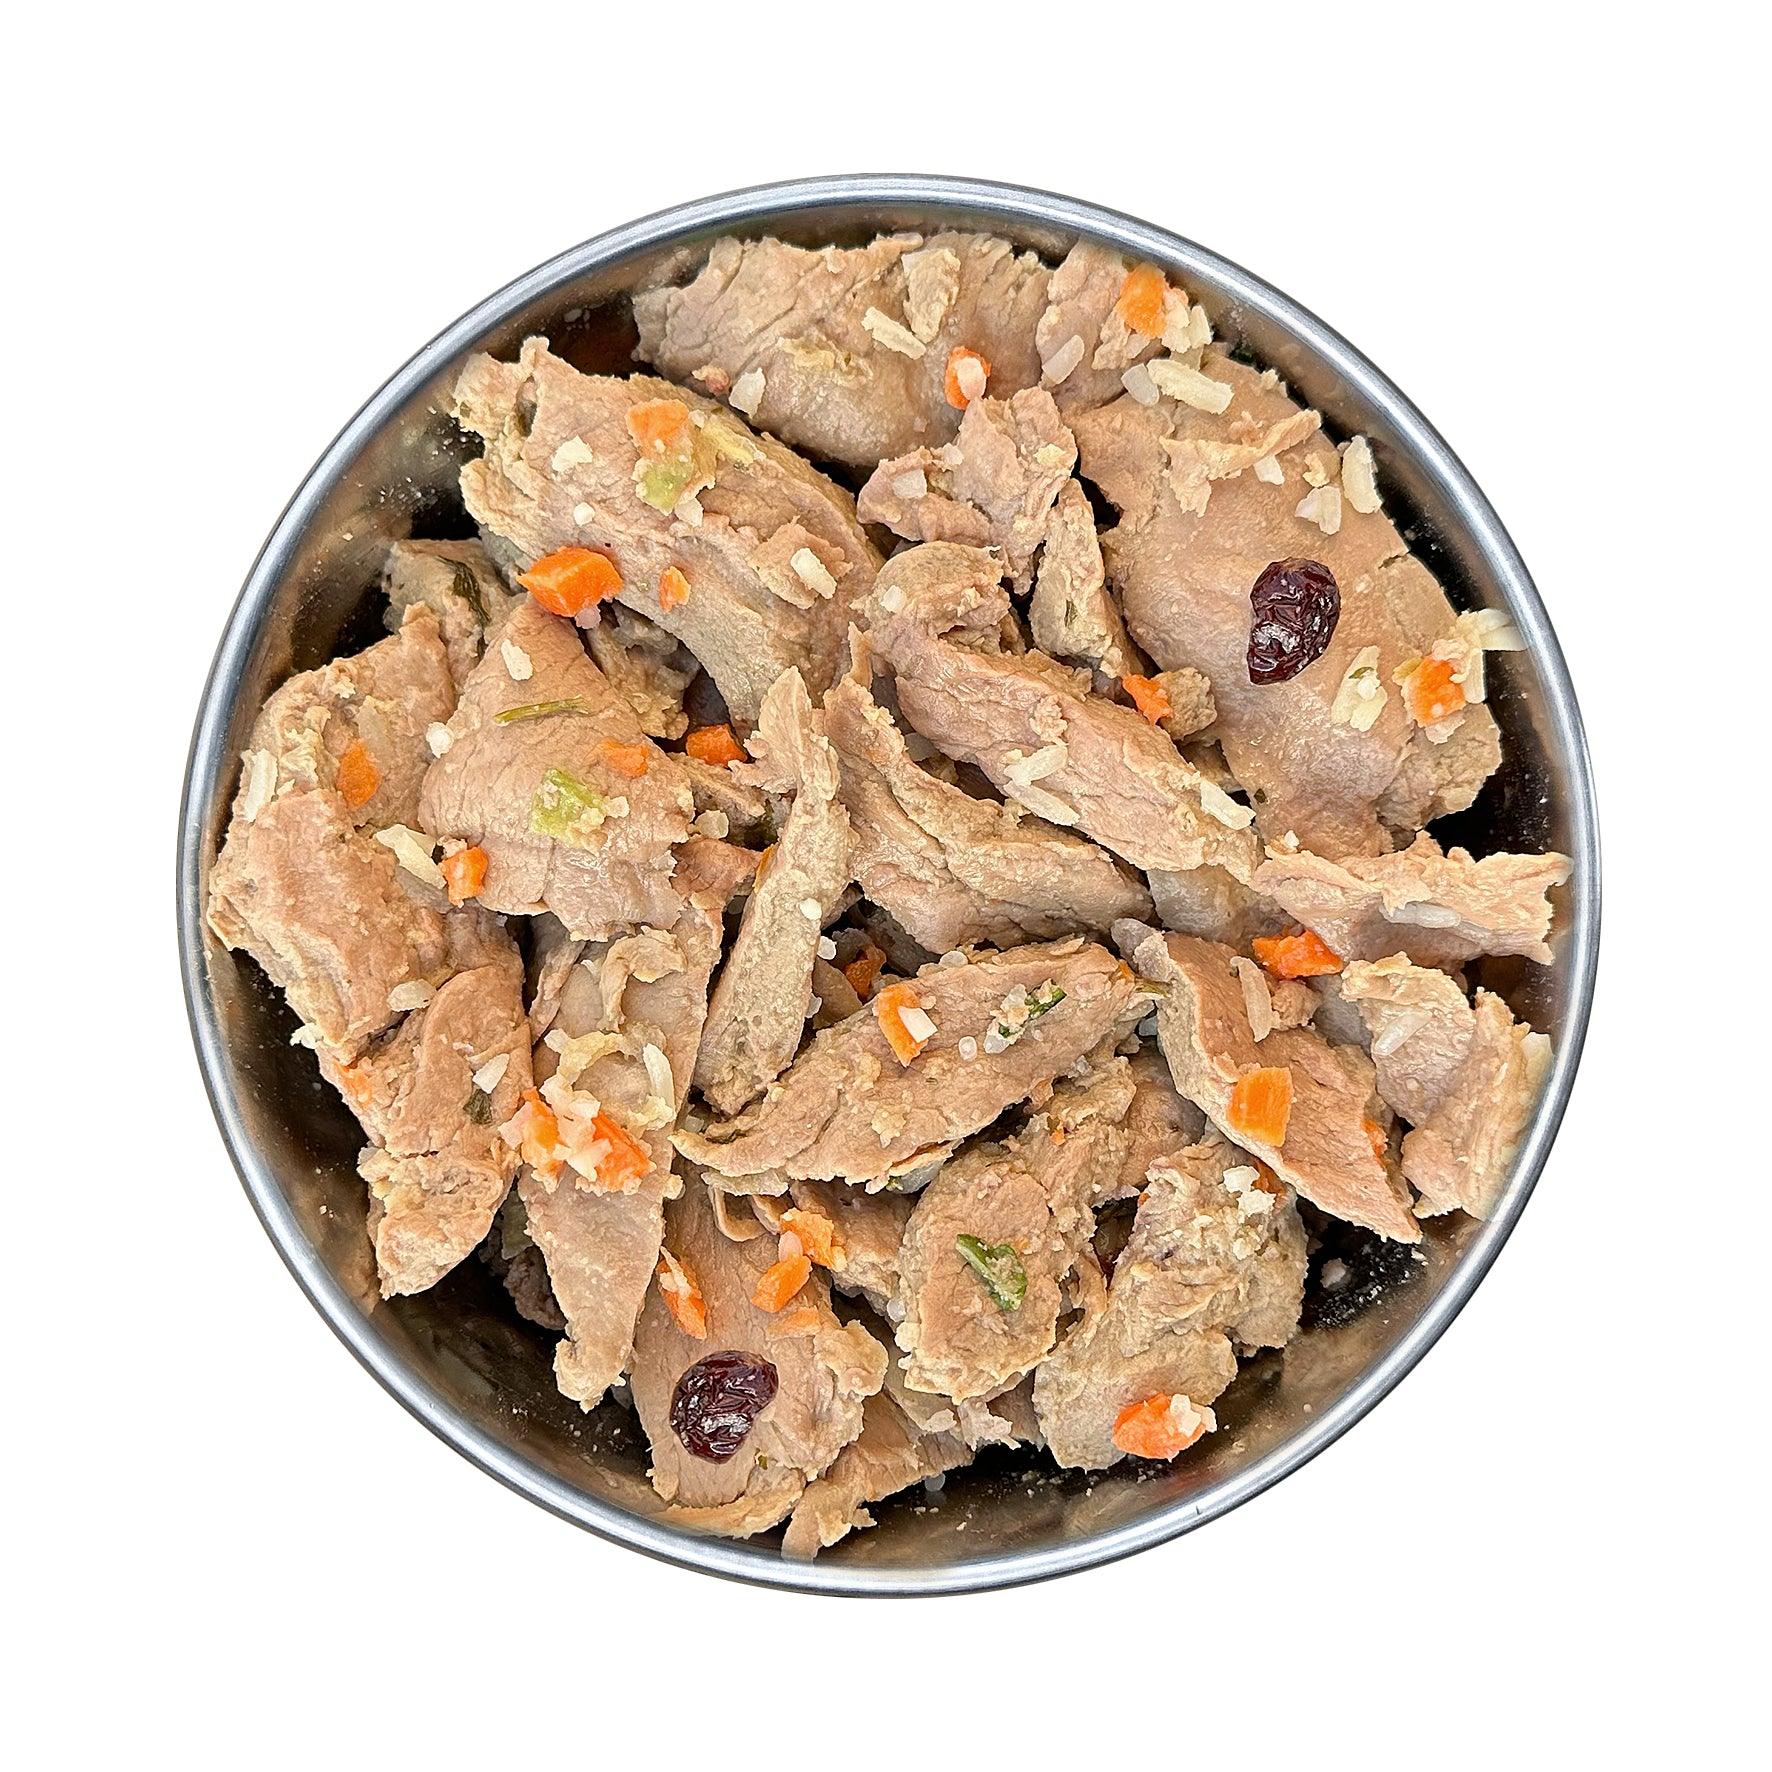 Cooked Fresh Rabbit Menu with Rice, Carrot and Cranberries (glass)